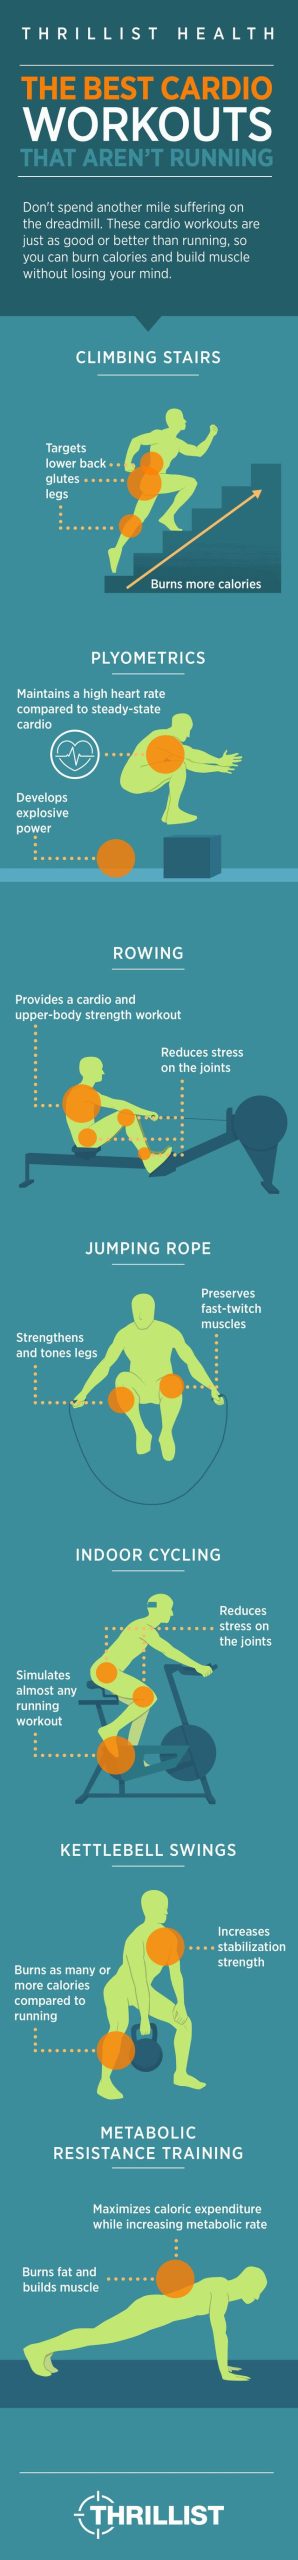 Cardio Workouts That Are Better Than Running